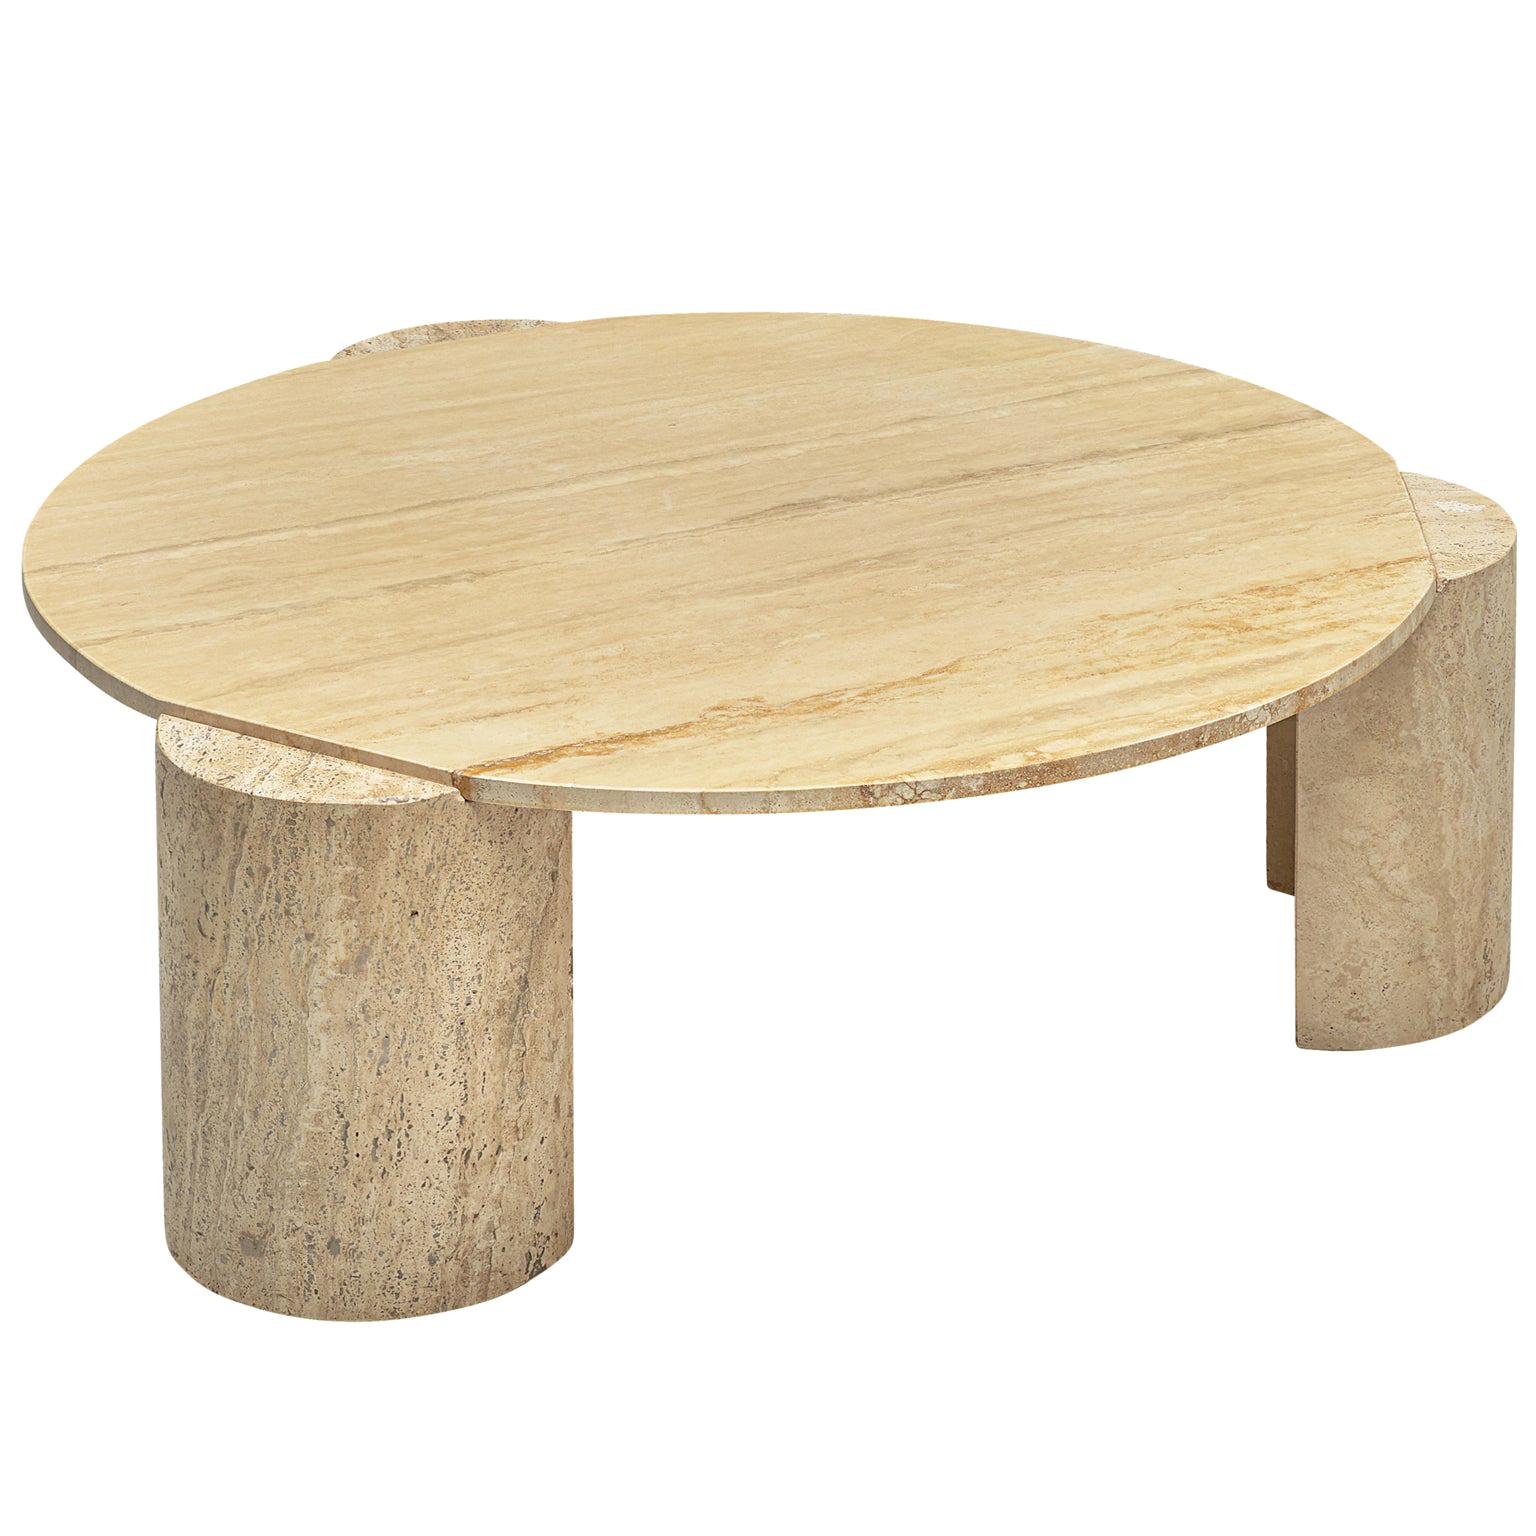 Three Legged Travertine Coffee Table with Round Table Top